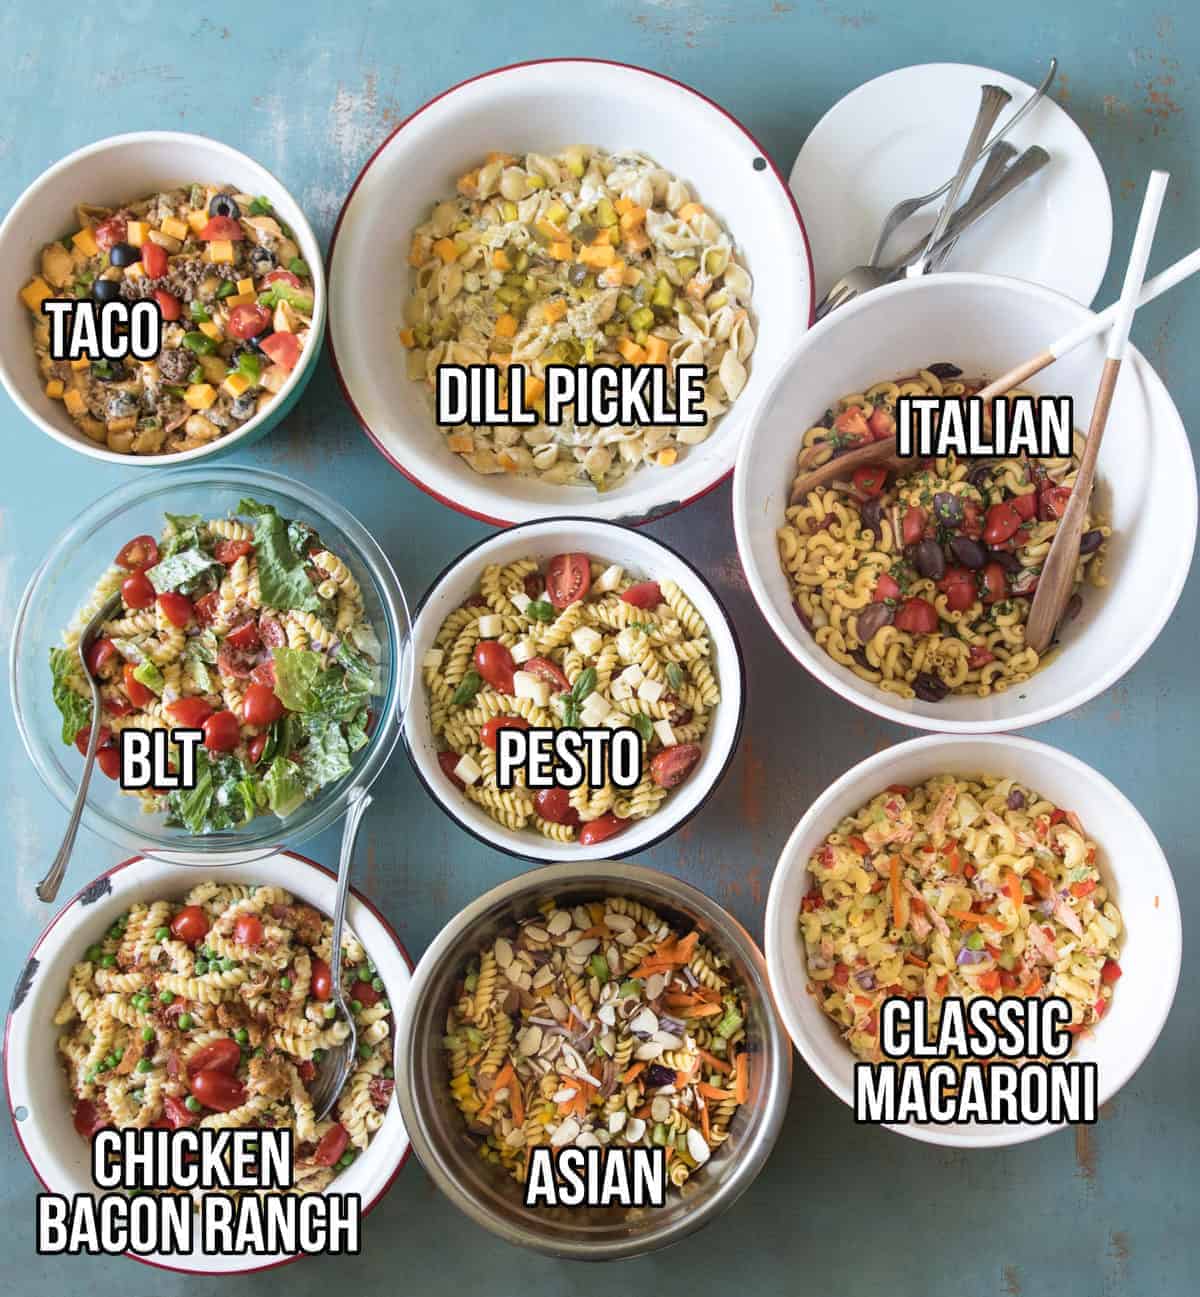 8 of my favorite pasta salad recipes plus tips and tricks on making the best pasta salad ever. BLT, Asian, Italian, Pesto, and more!